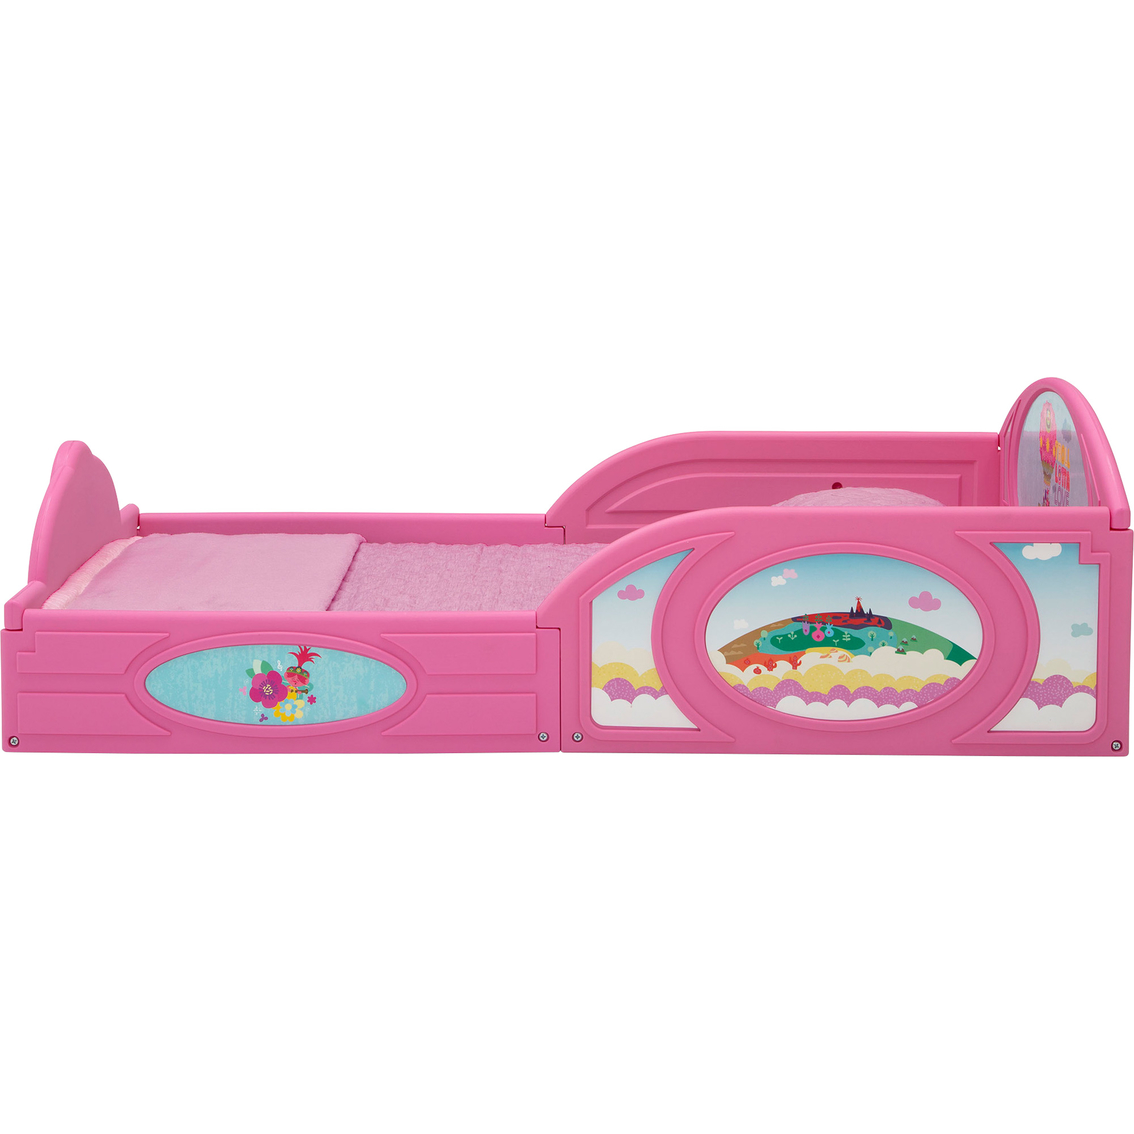 Delta Children Trolls World Tour Plastic Sleep and Play Toddler Bed - Image 4 of 9